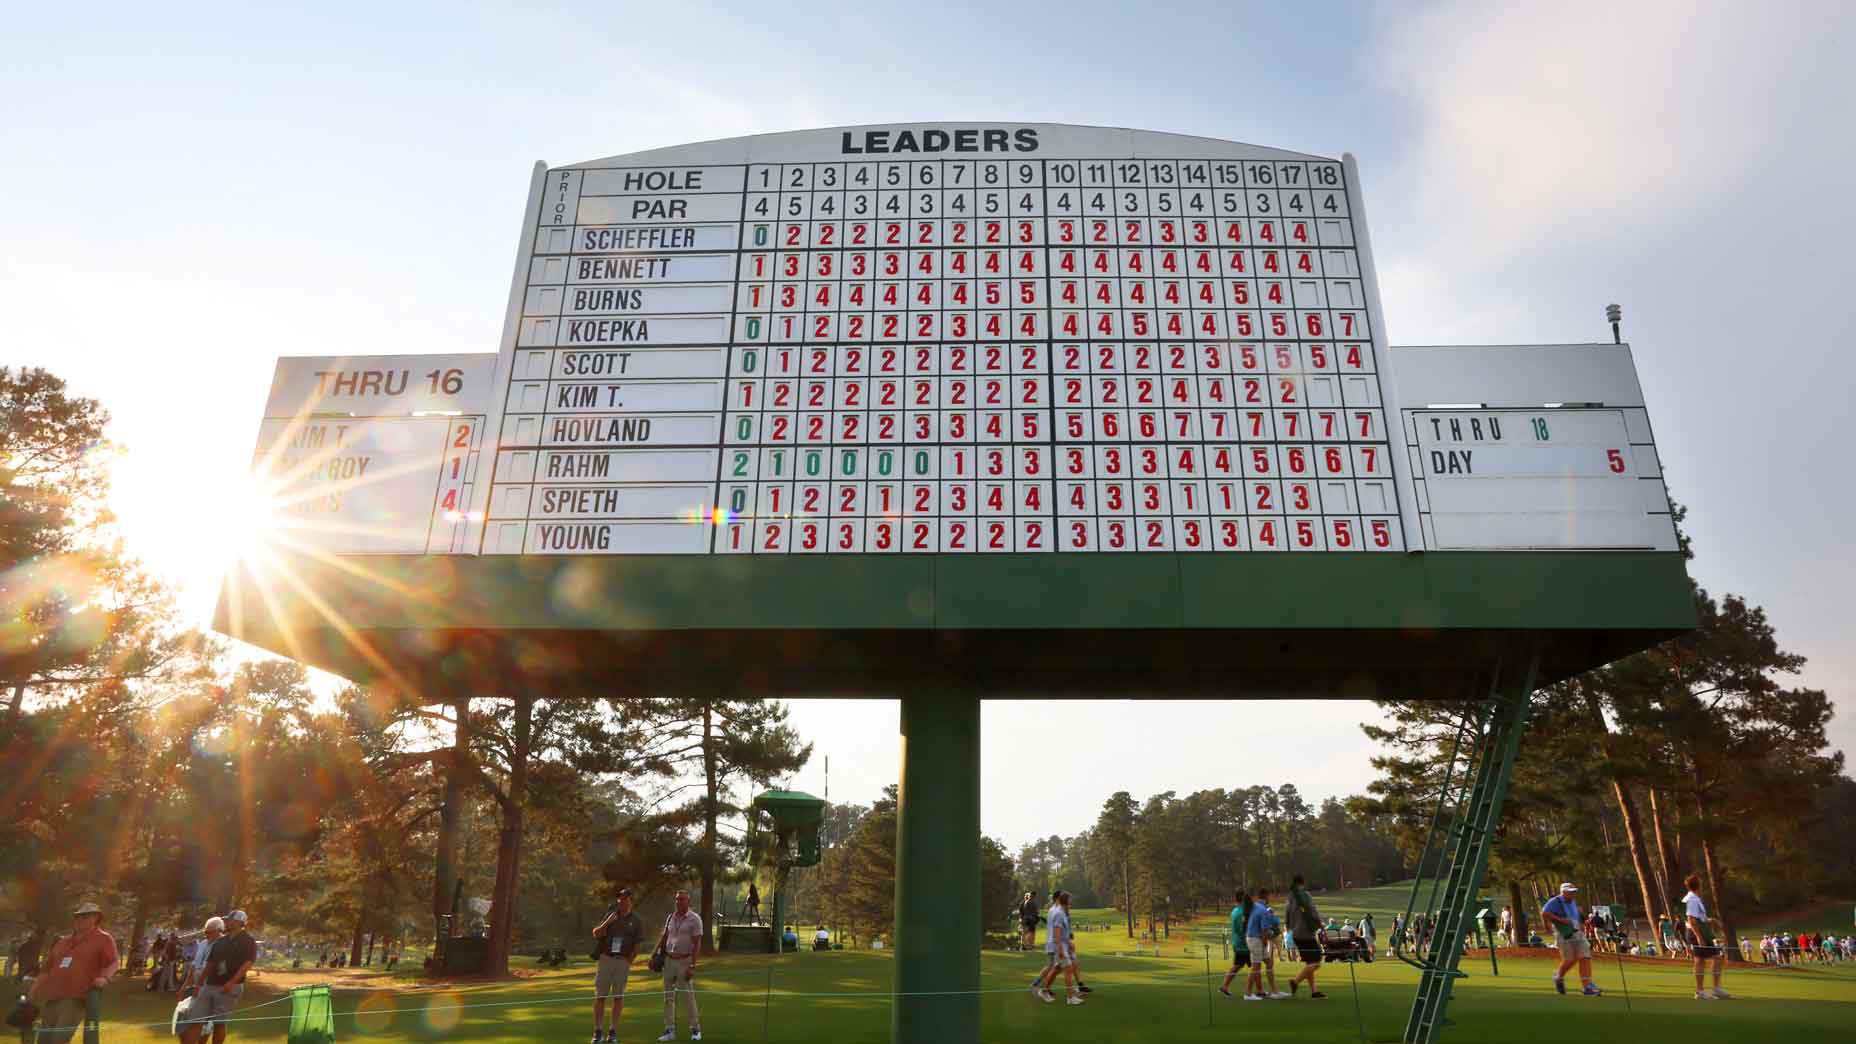 2023 Masters tee times: Round 4 pairings for Sunday